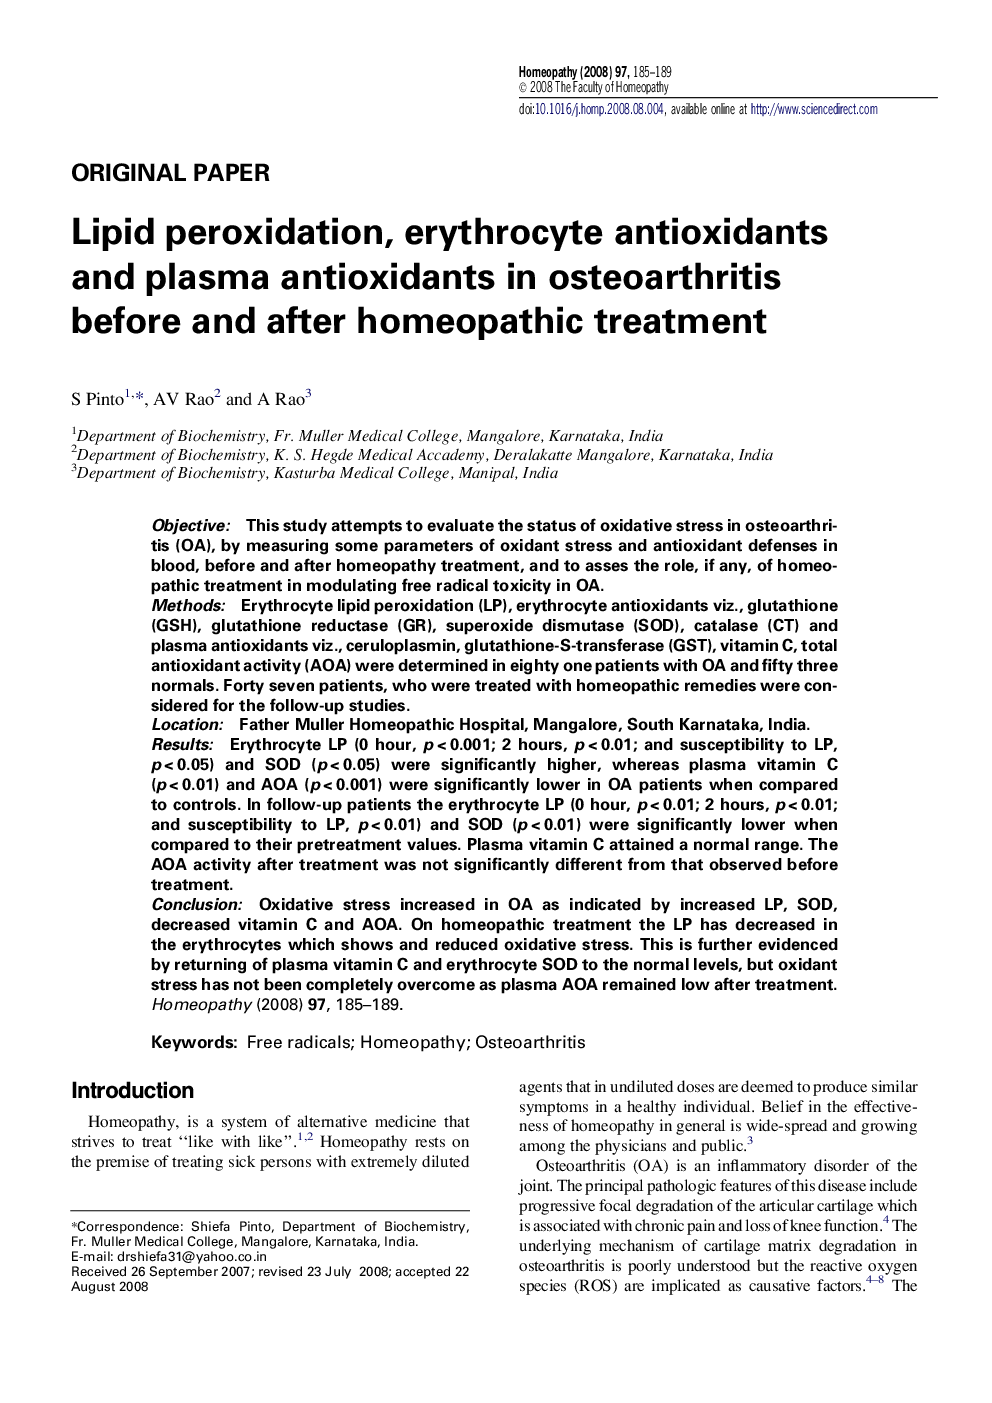 Lipid peroxidation, erythrocyte antioxidants and plasma antioxidants in osteoarthritis before and after homeopathic treatment